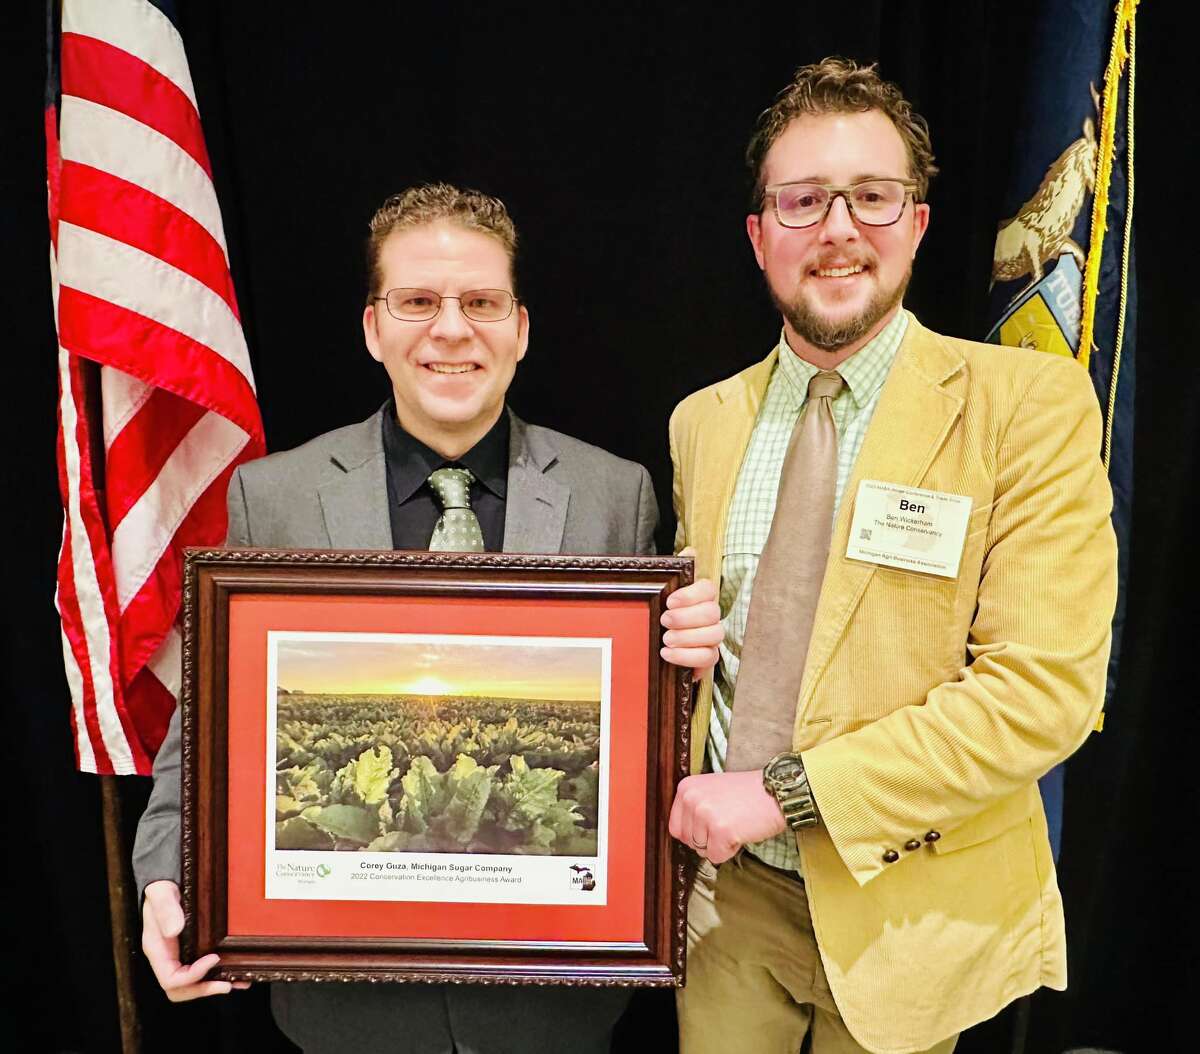 Michigan Sugar Company Director of Research and Agronomy Corey Guza, left, receives a conservation award from Ben Wickerham on behalf of Michigan Sugar.